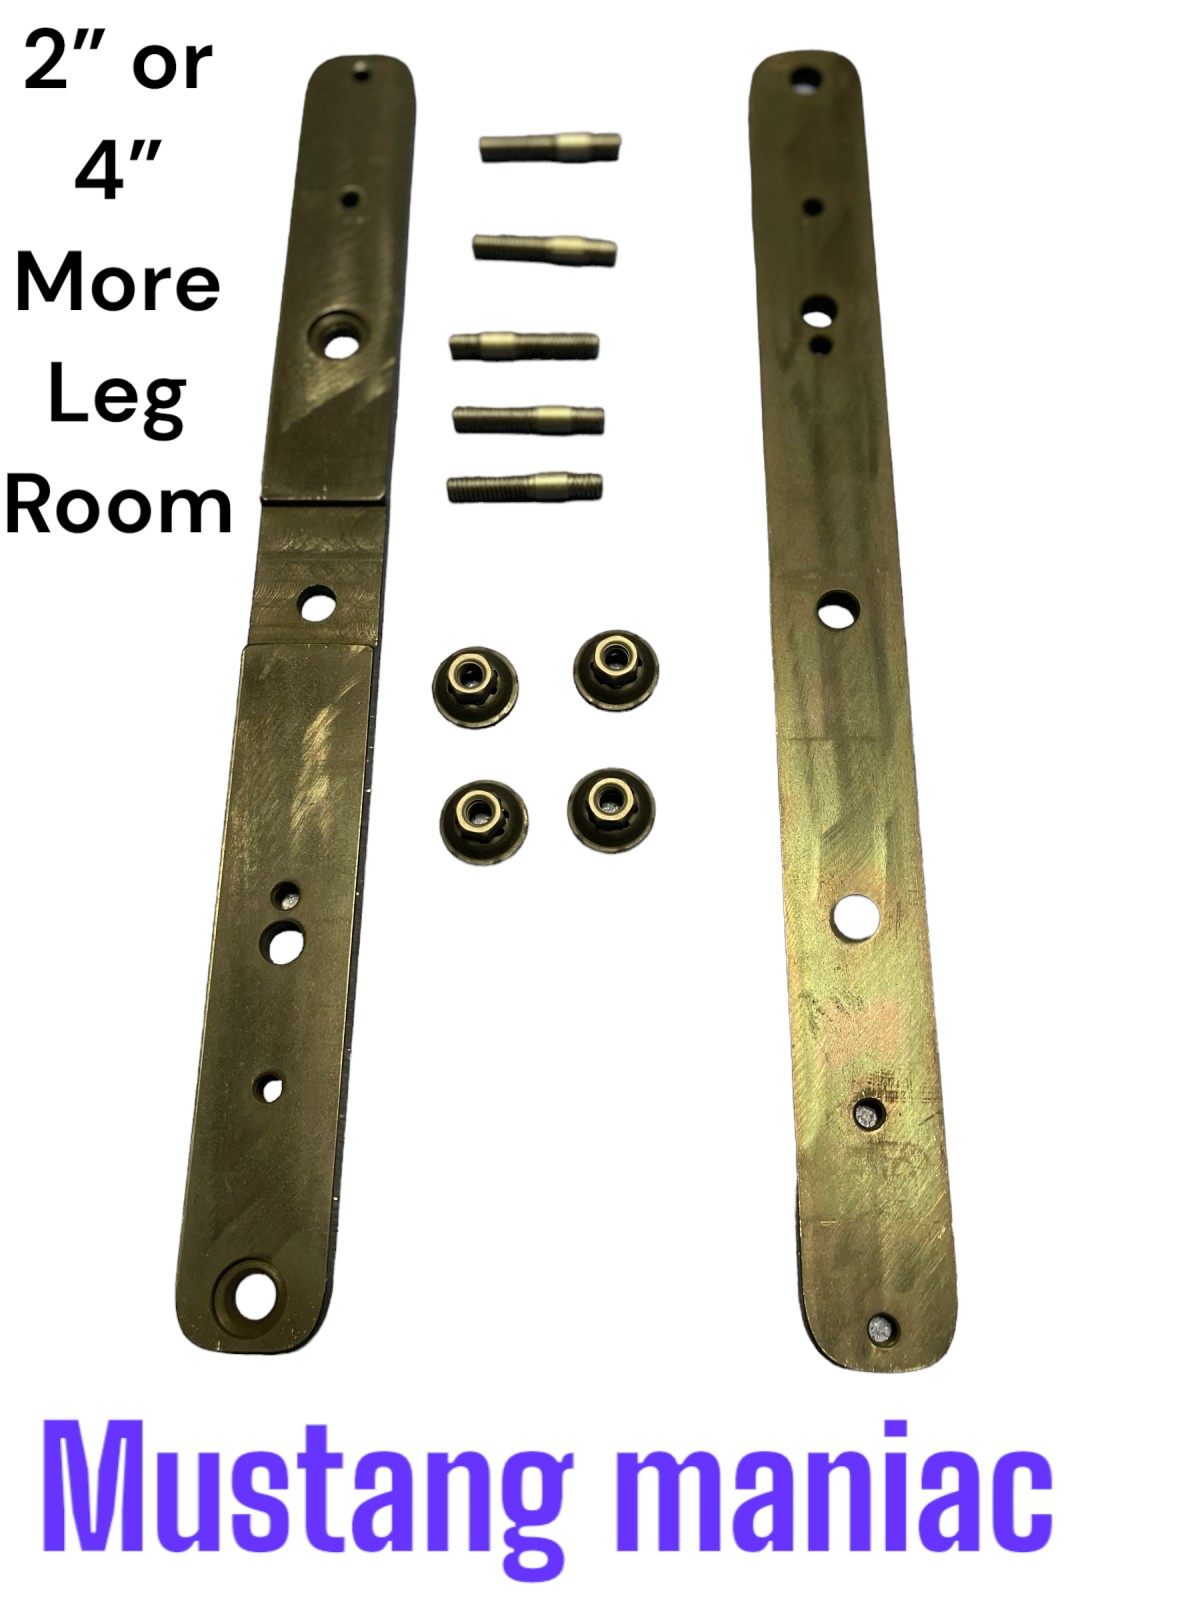 64-68 Seat extender 2" or 4"